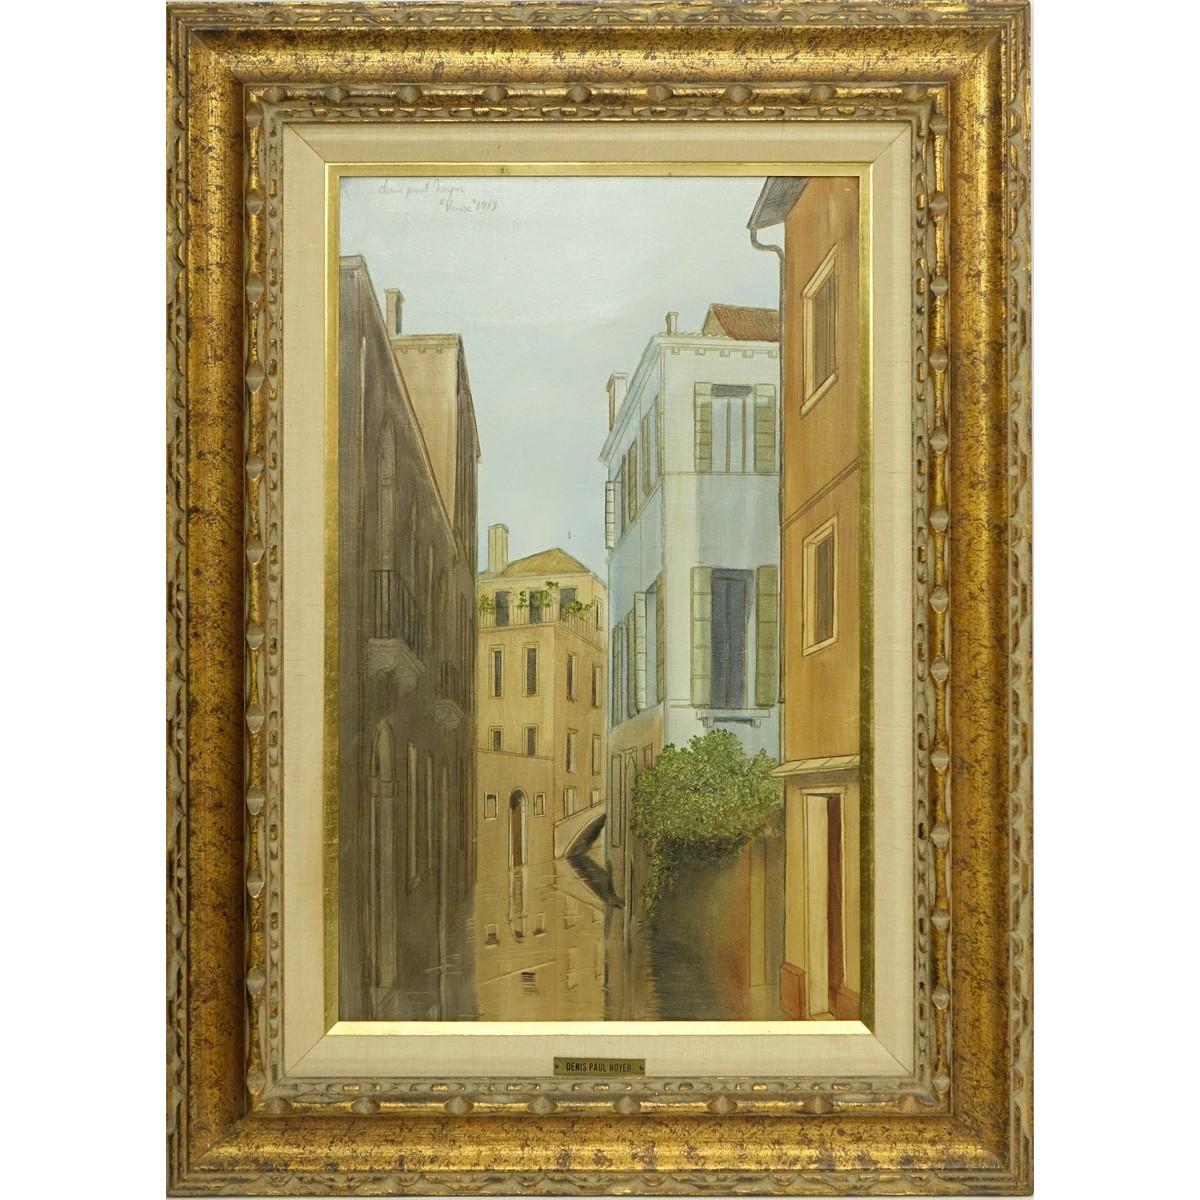 Denis Paul Noyer, French (born 1940) Oil on canvas "Venice". Inscribed, signed upper left, dated '69.